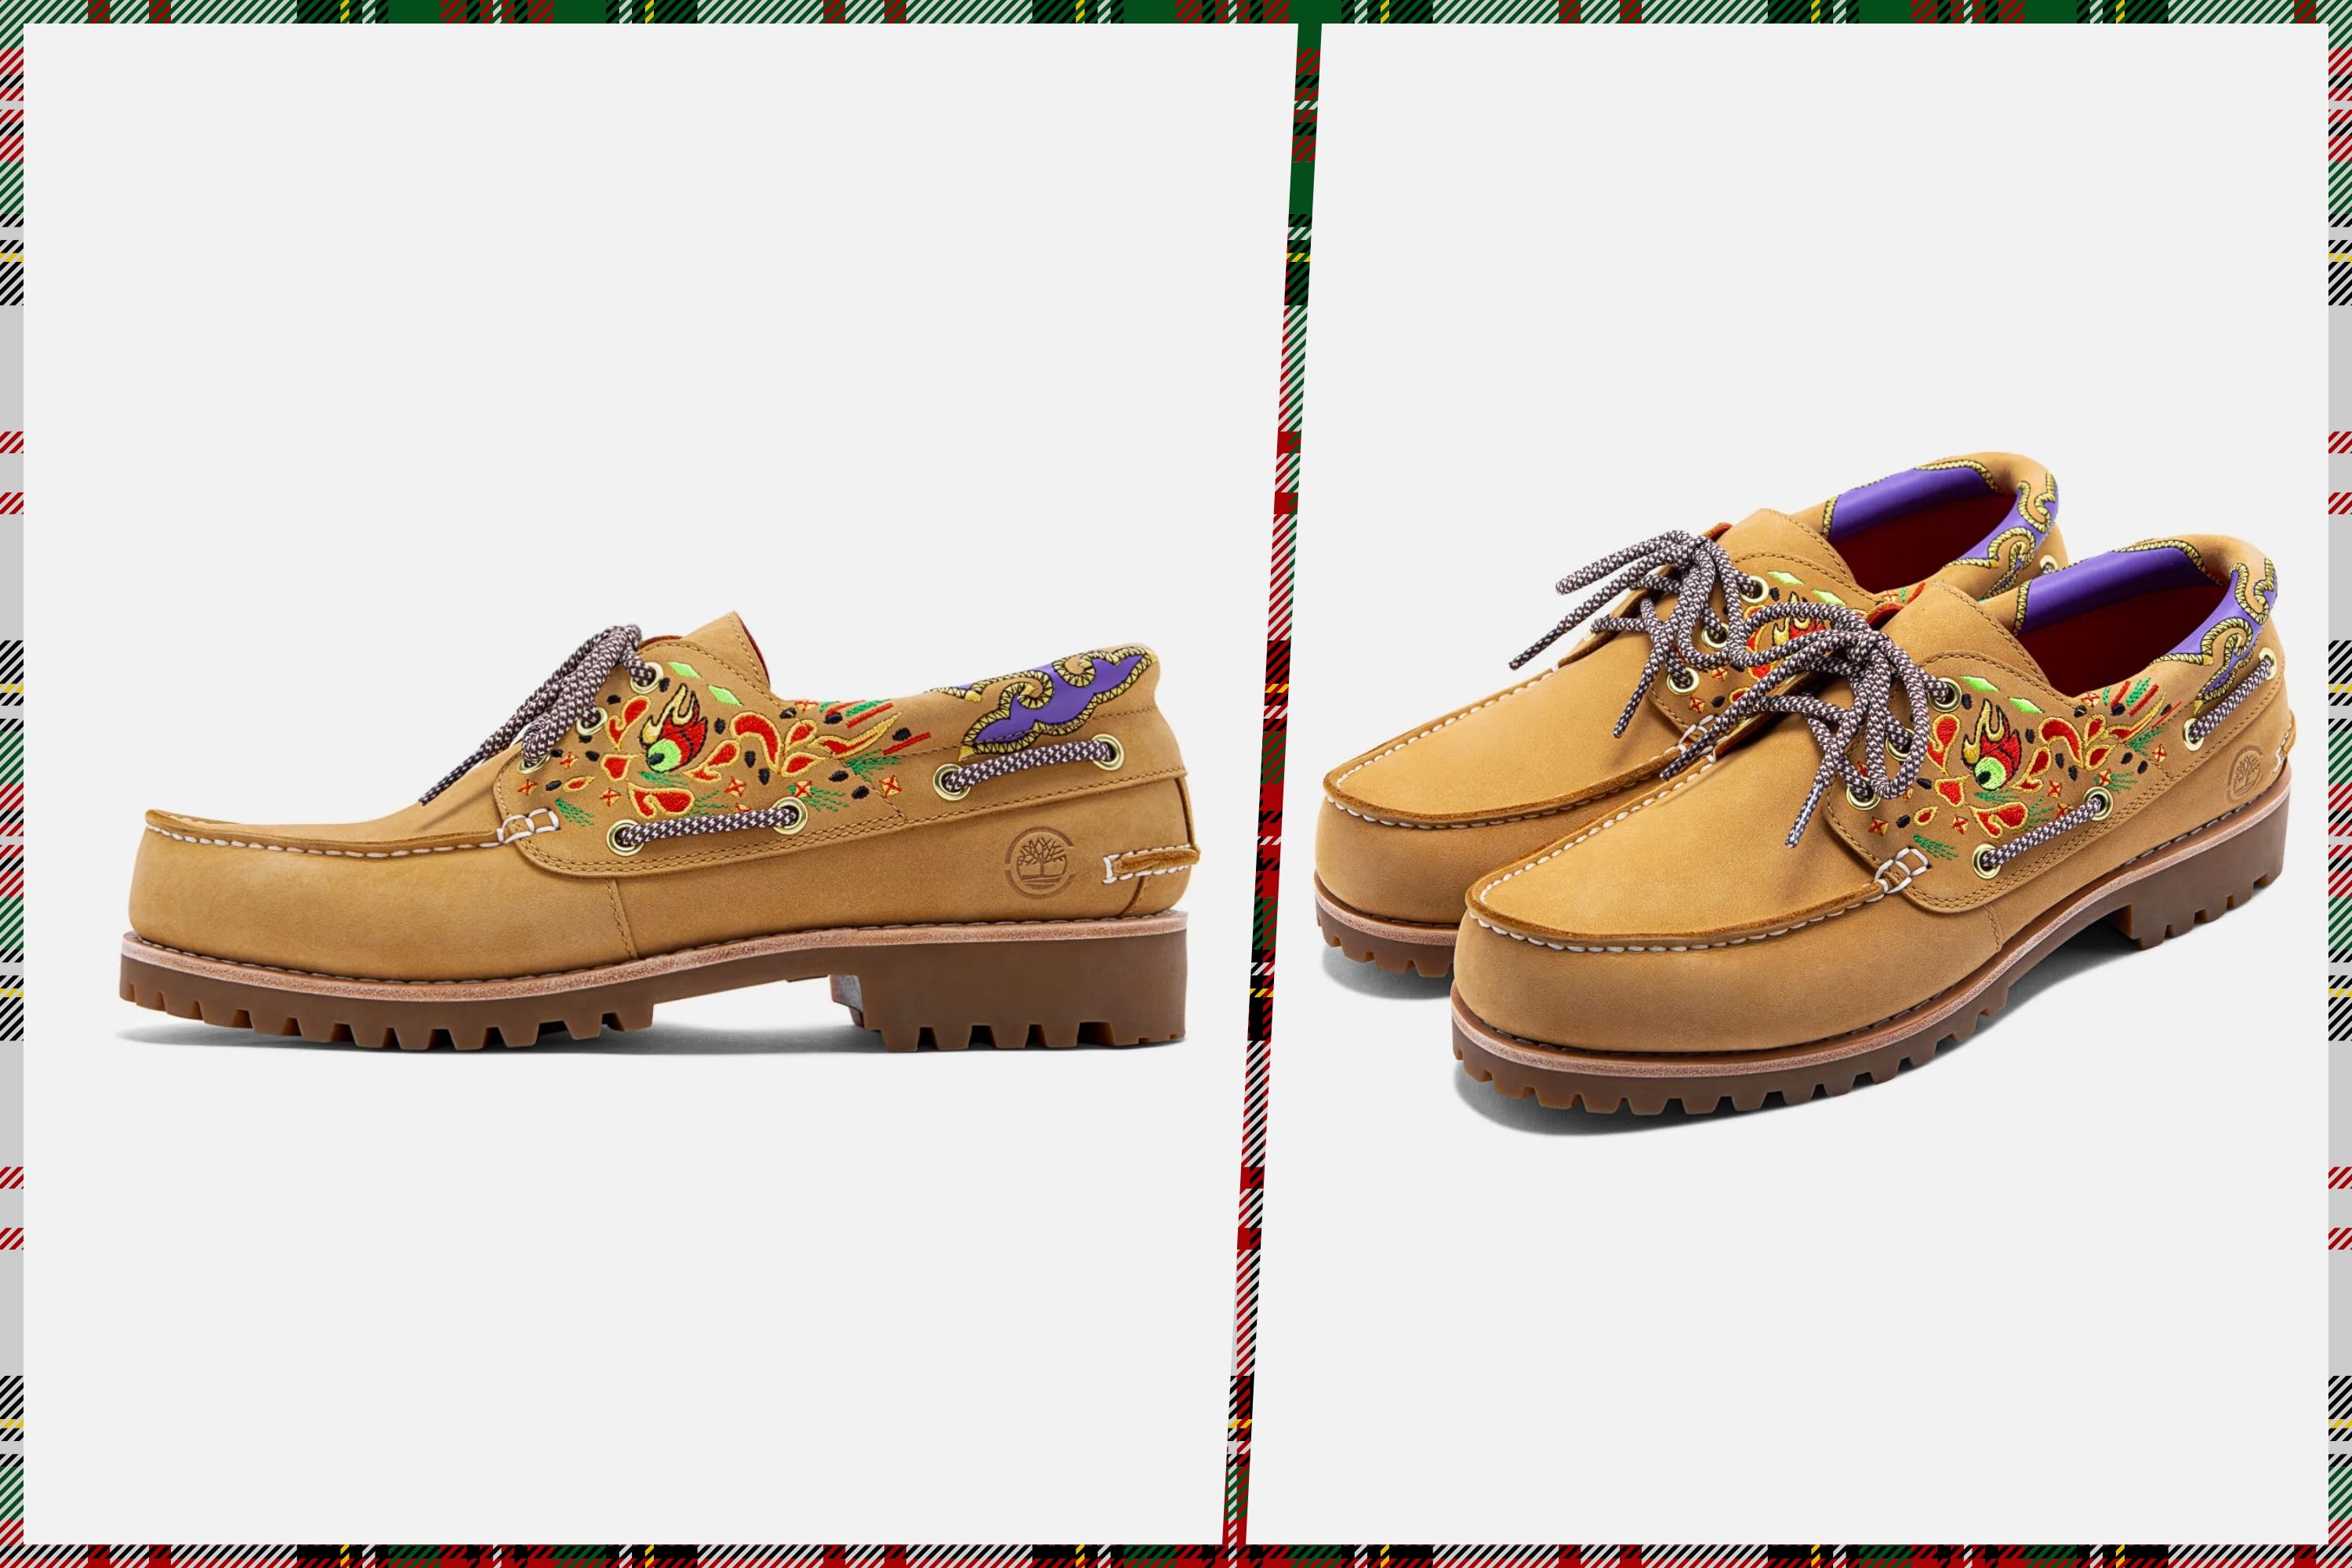 JUICE Holiday Gift Guide - CLOT x Timberland Men's 3-eye Lug Handsewn Boat Shoes